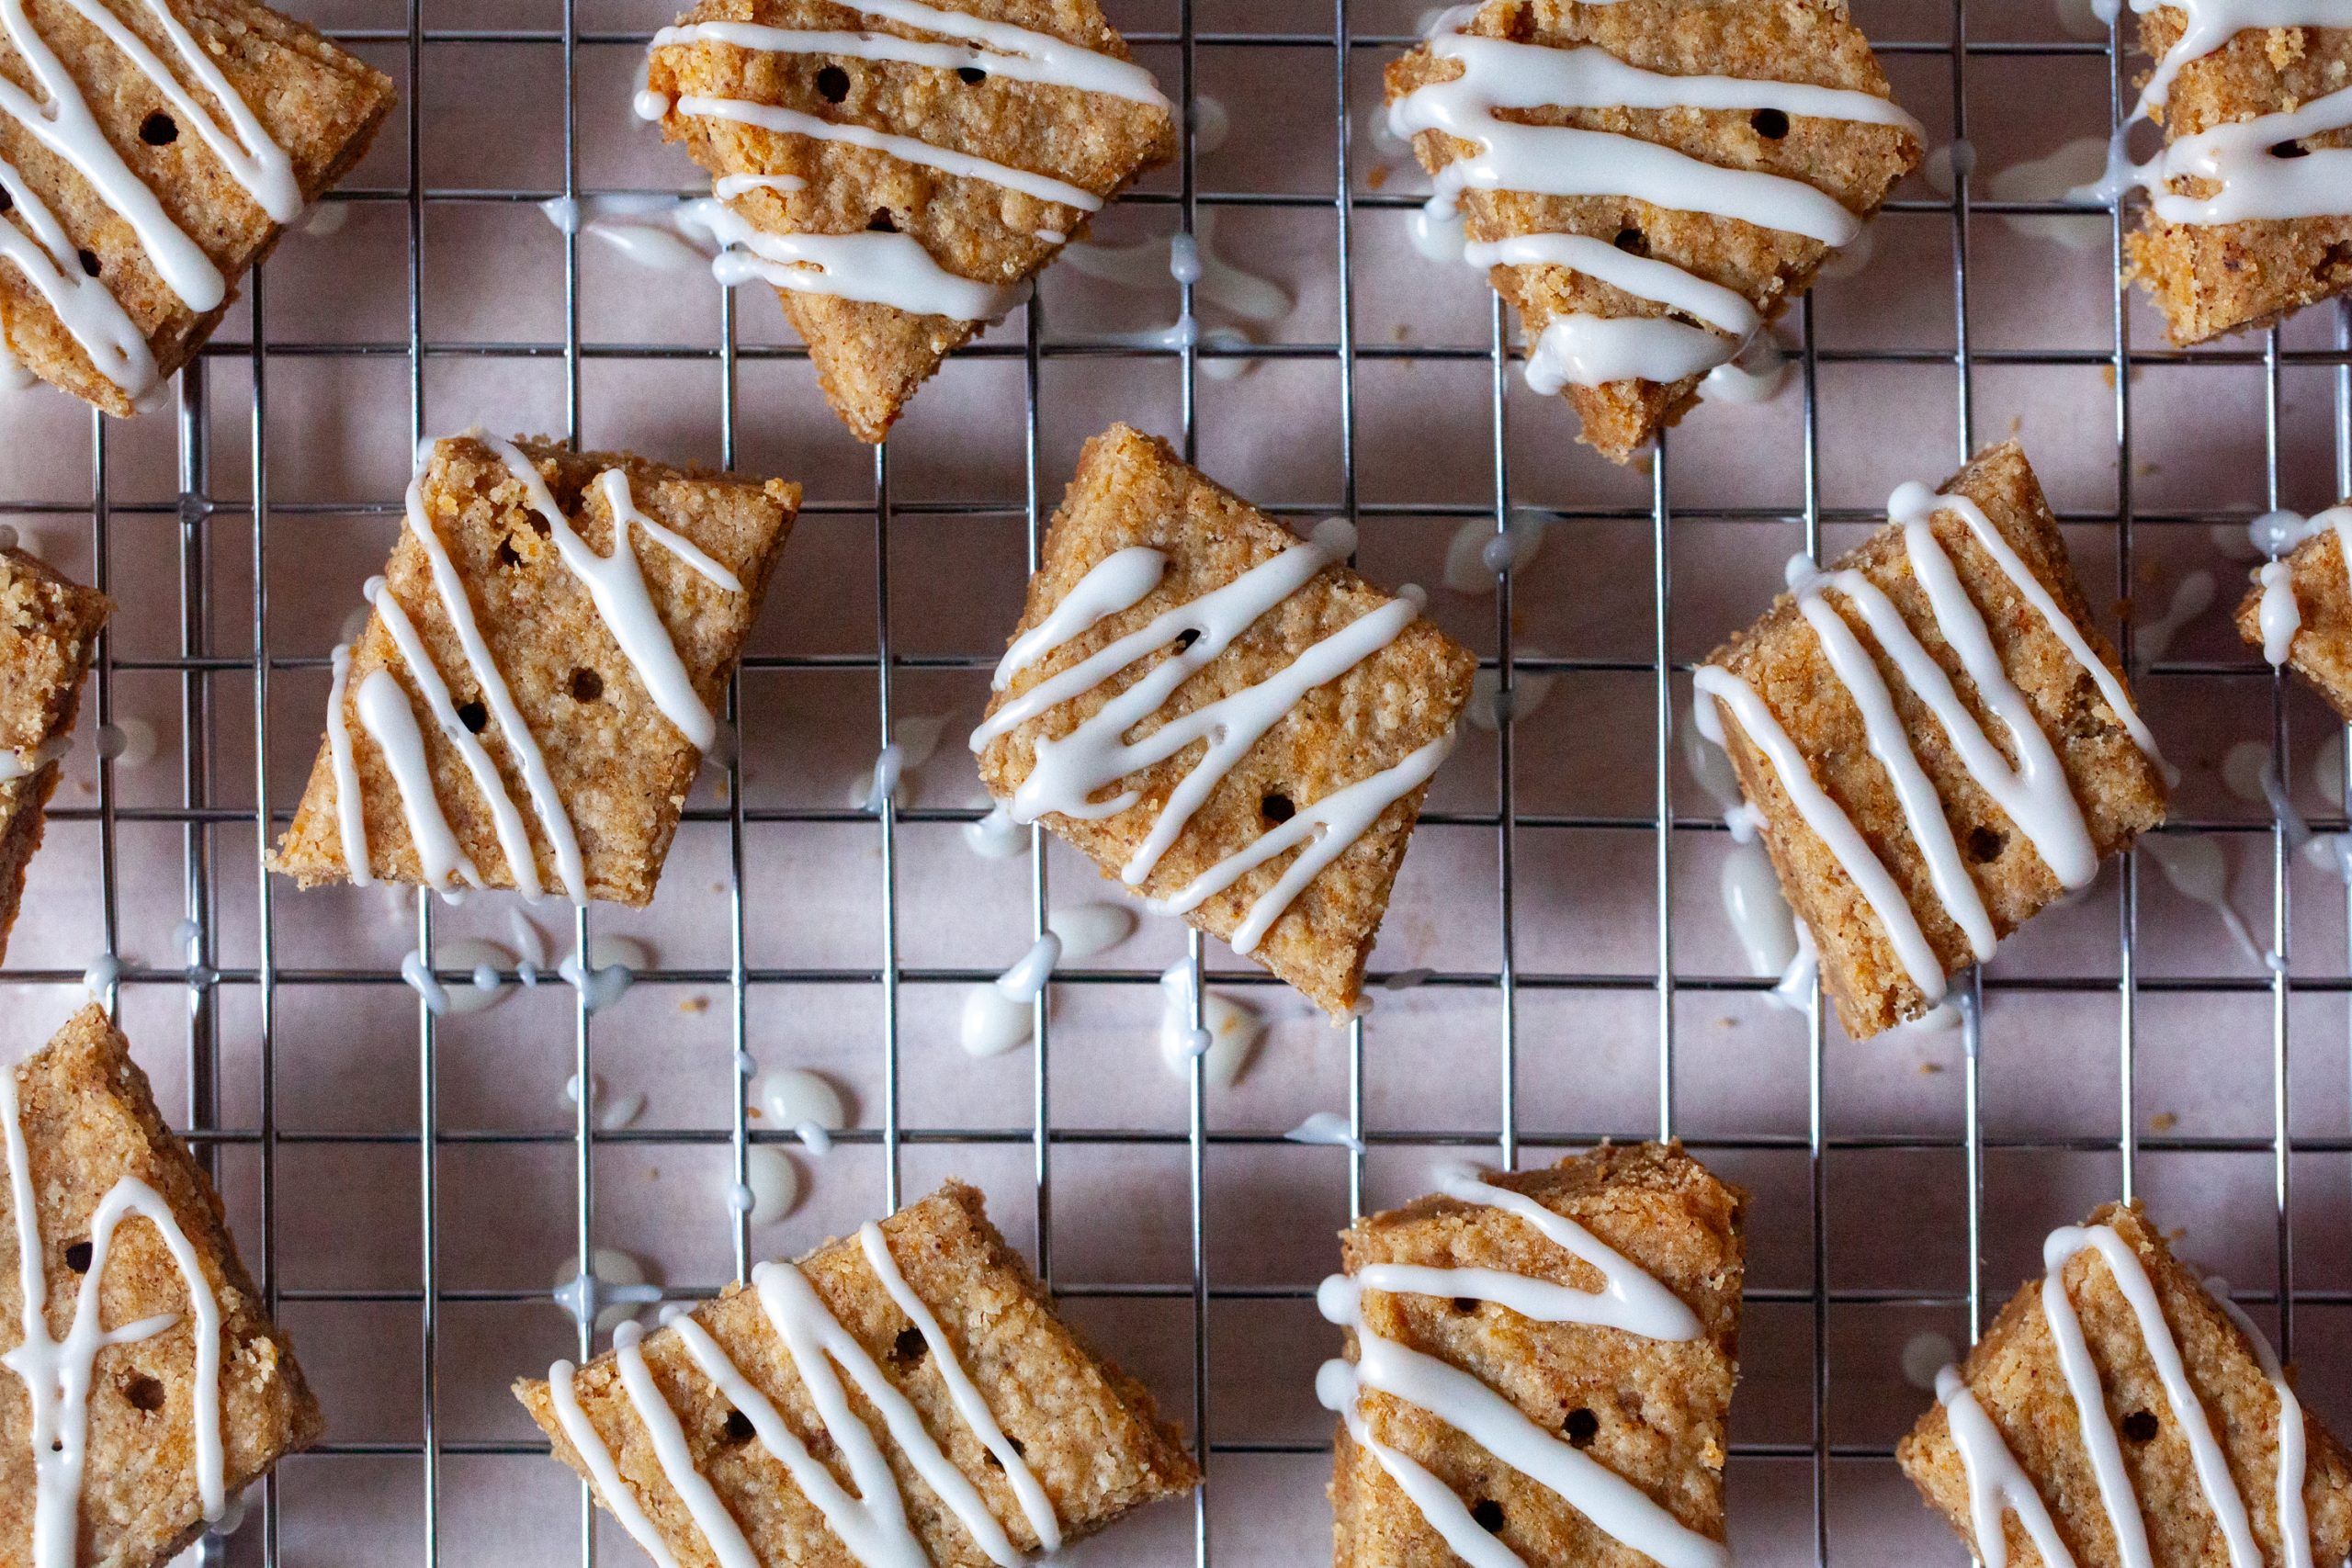 Kitchn's Most Popular Baked Goods of 2020